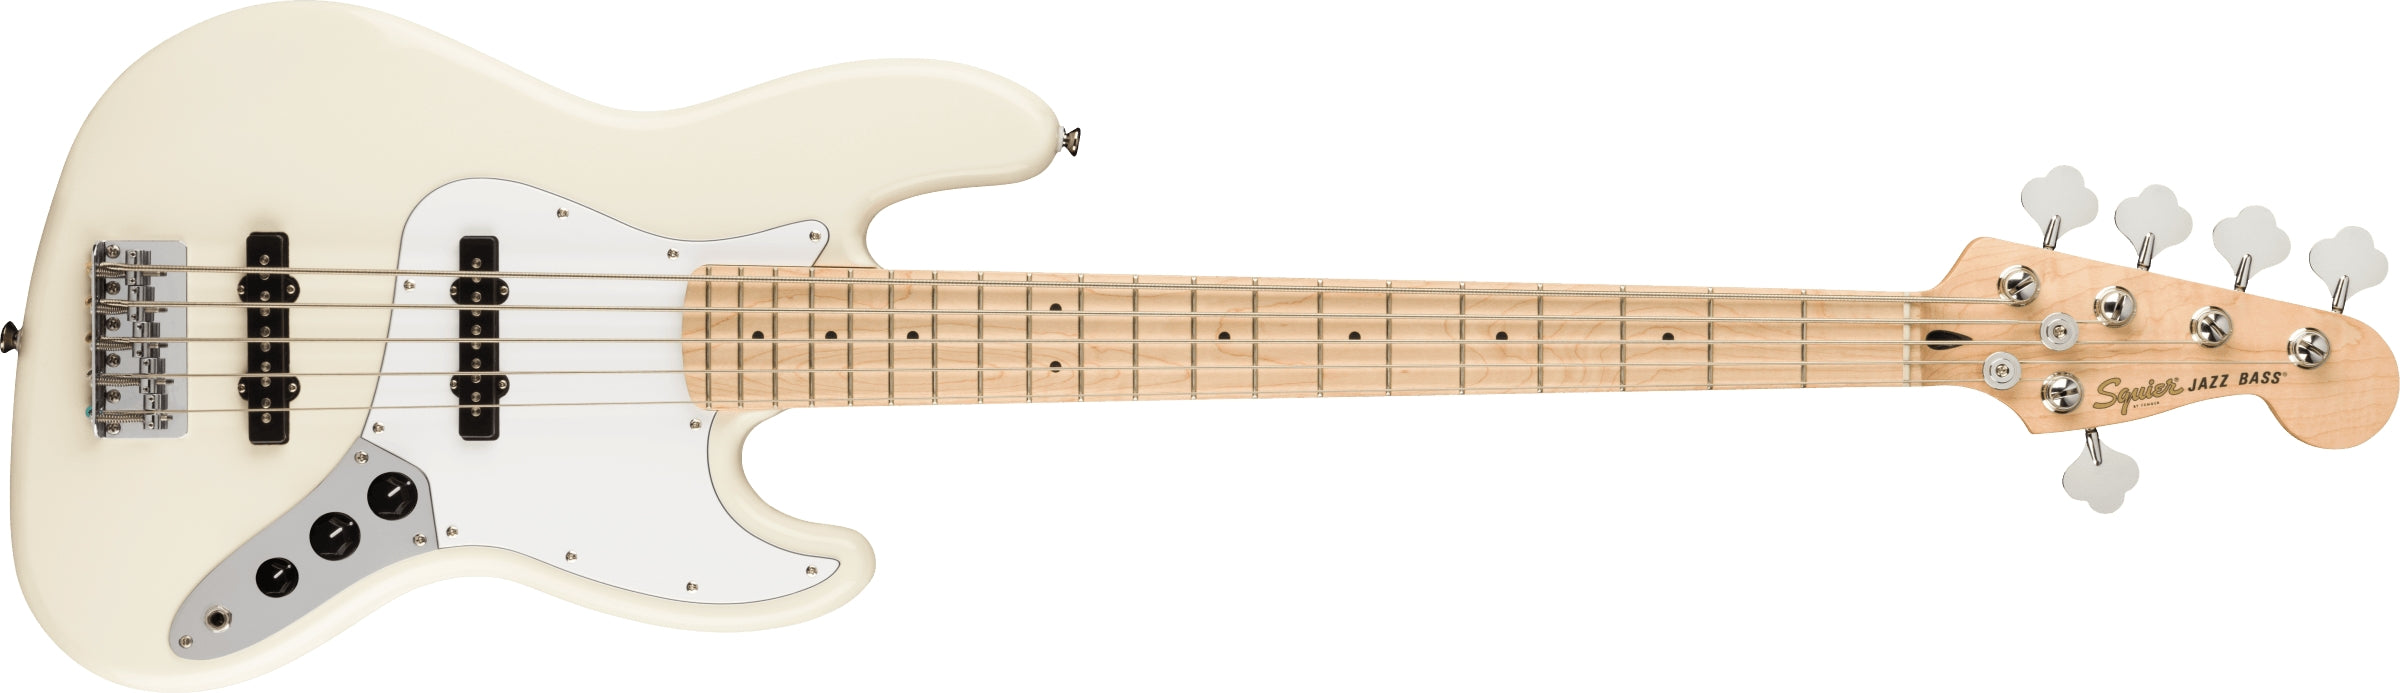 Squier - Affinity Series™ Jazz Bass® V - Maple Fingerboard - White  Pickguard - Olympic White 037-8652-505